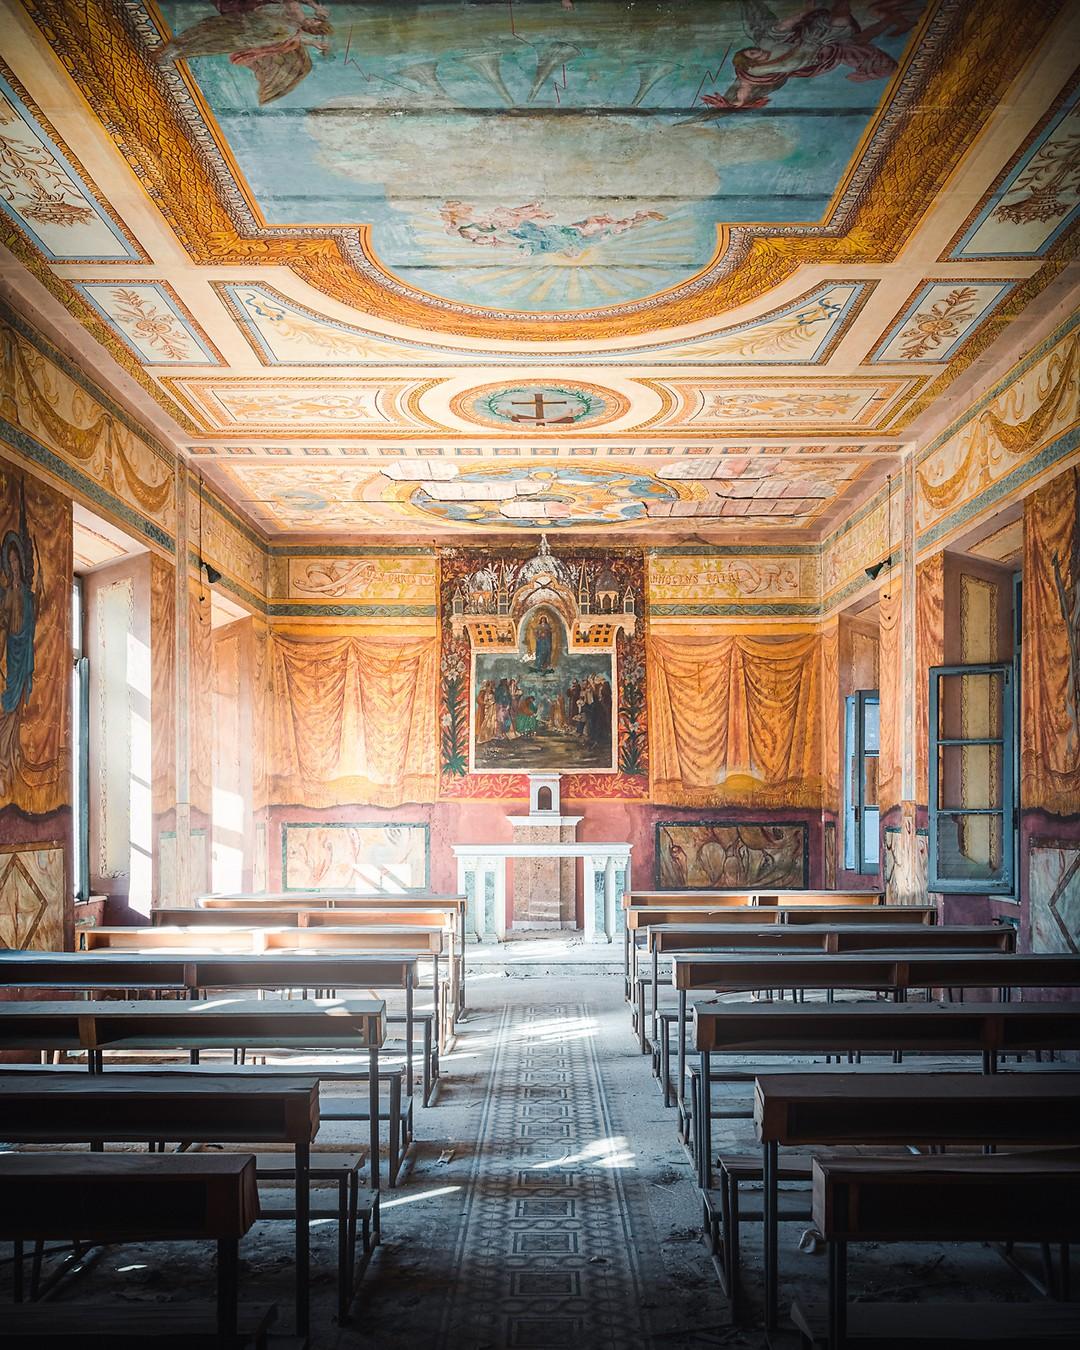 An abandoned church in Viterbo province, Italy. (Courtesy of <a href="https://romanrobroek.nl/">Roman Robroek Photography</a> and <a href="https://www.instagram.com/romanrobroek/">@romanrobroek</a>)